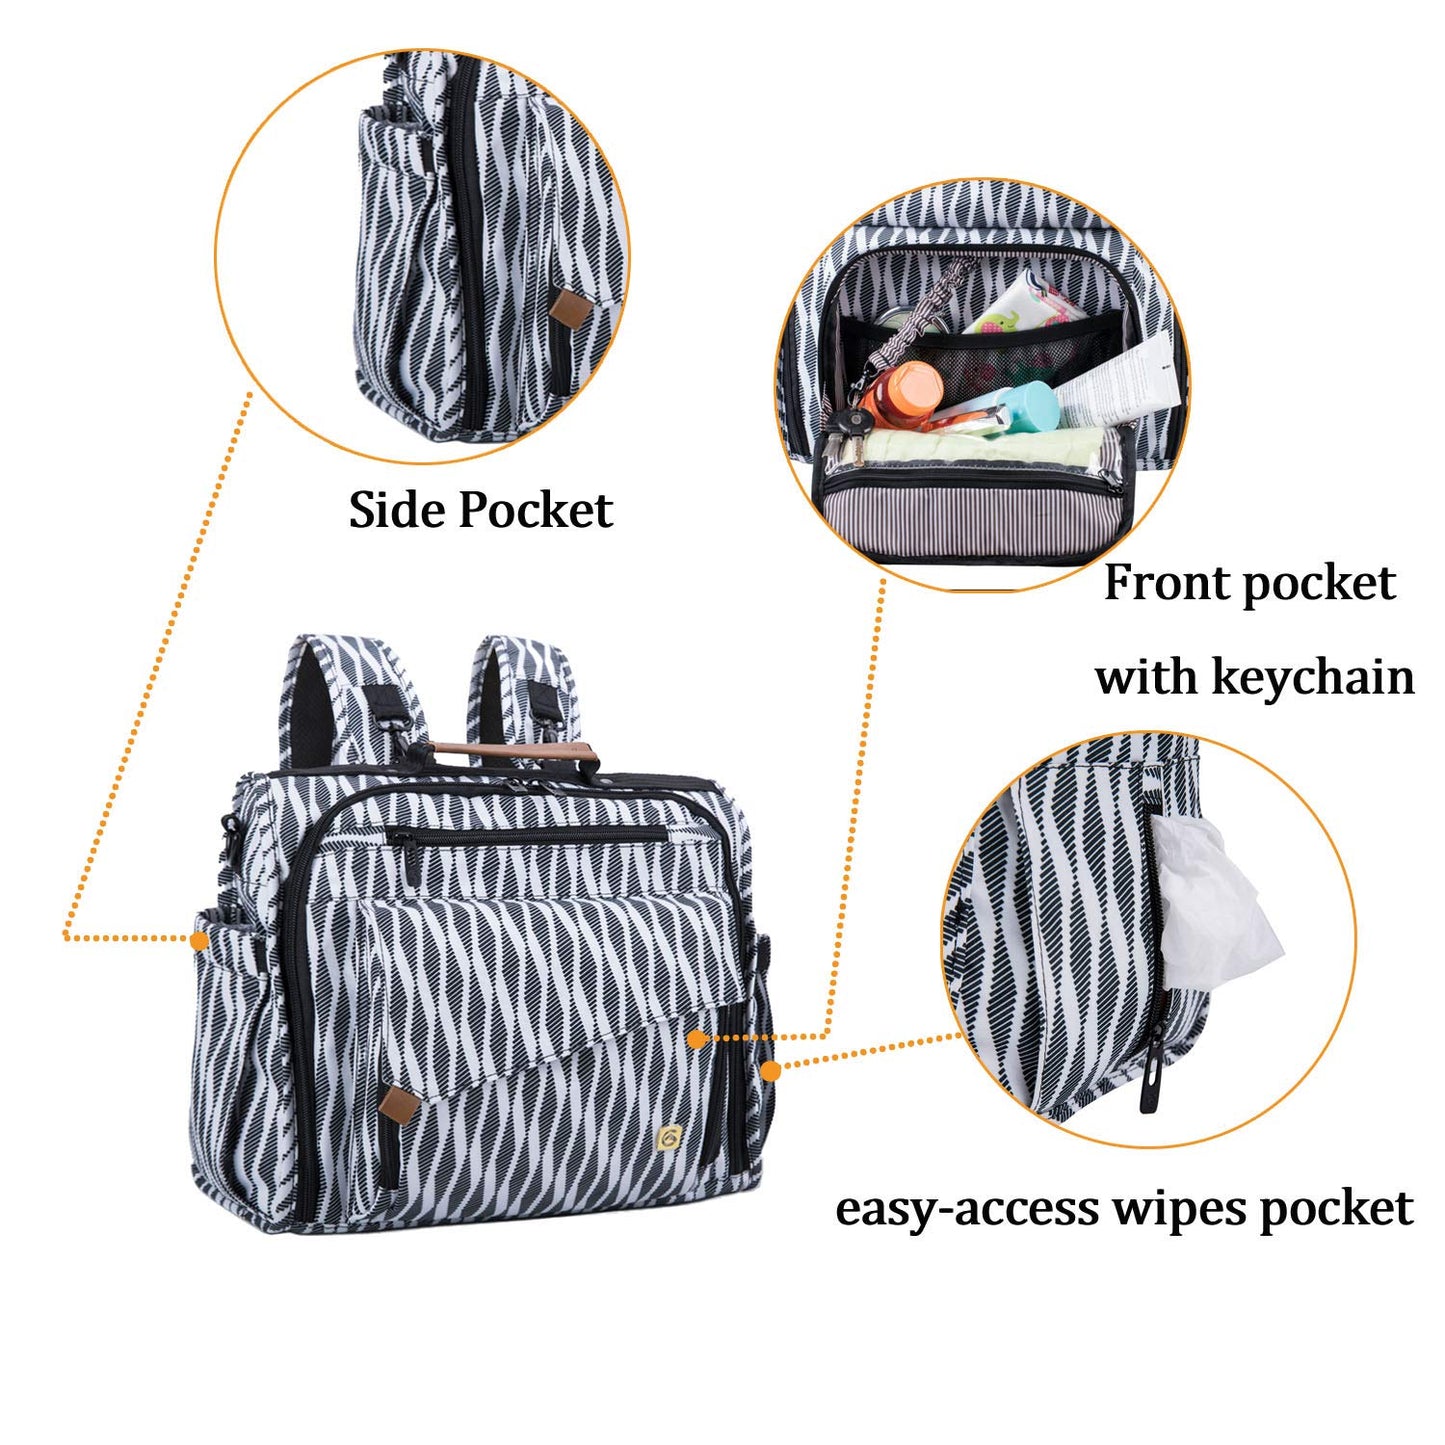 ALLCAMP Zebra Diaper Bag/Multi-Functional Convertible Diaper Backpack Messenger Bag,Large Capacity, Waterproof and Stylish - (For 6 piece(s))